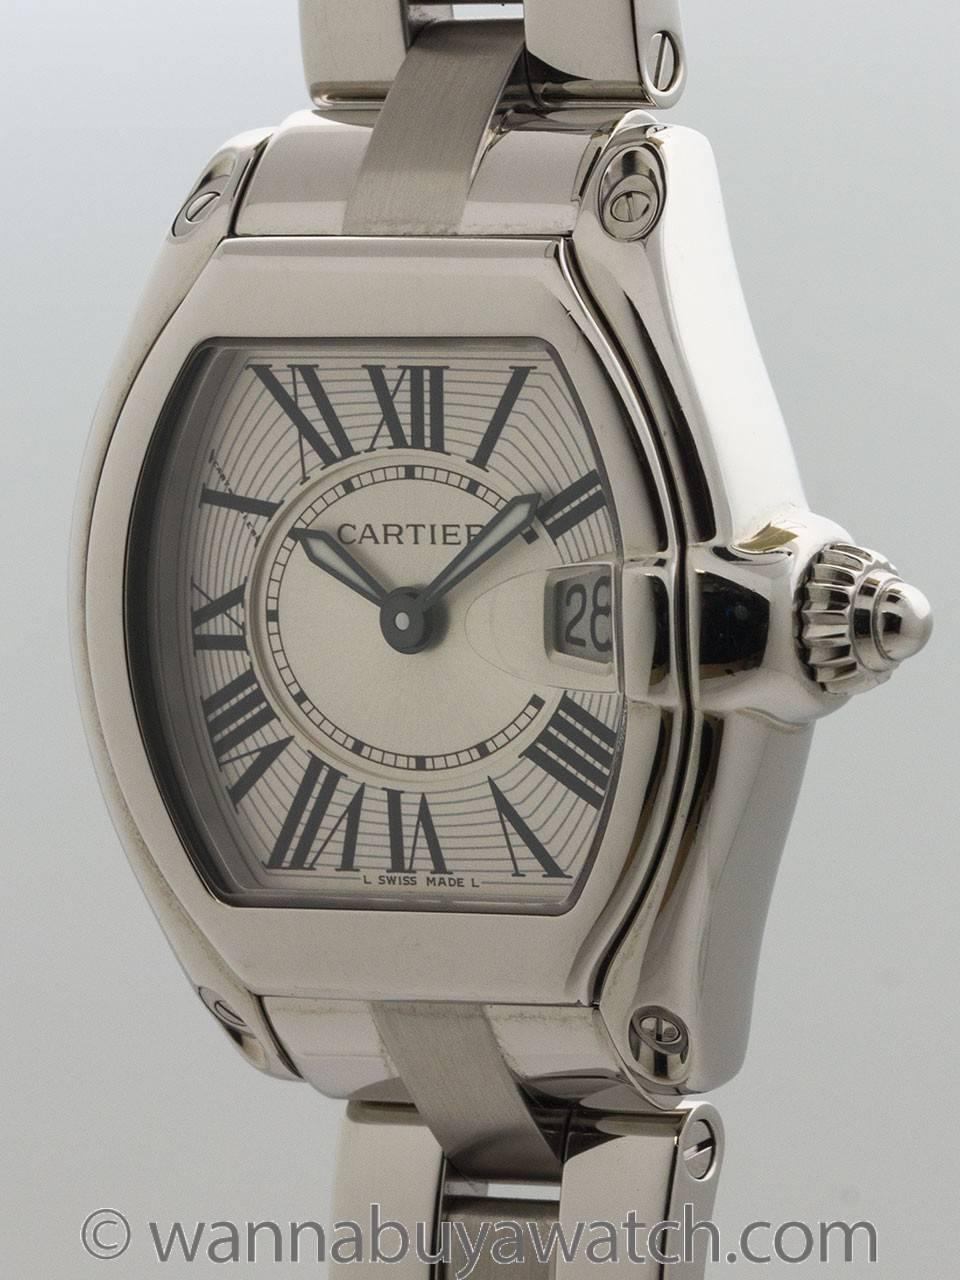 Cartier SS Roadster circa 2005 silvered dial with Roman figures quartz battery powered movement with Cartier bracelet with butterfly deployment clasp. Great looking robust design, ideal midsize for a woman. Guaranteed genuine, serviced by one of our